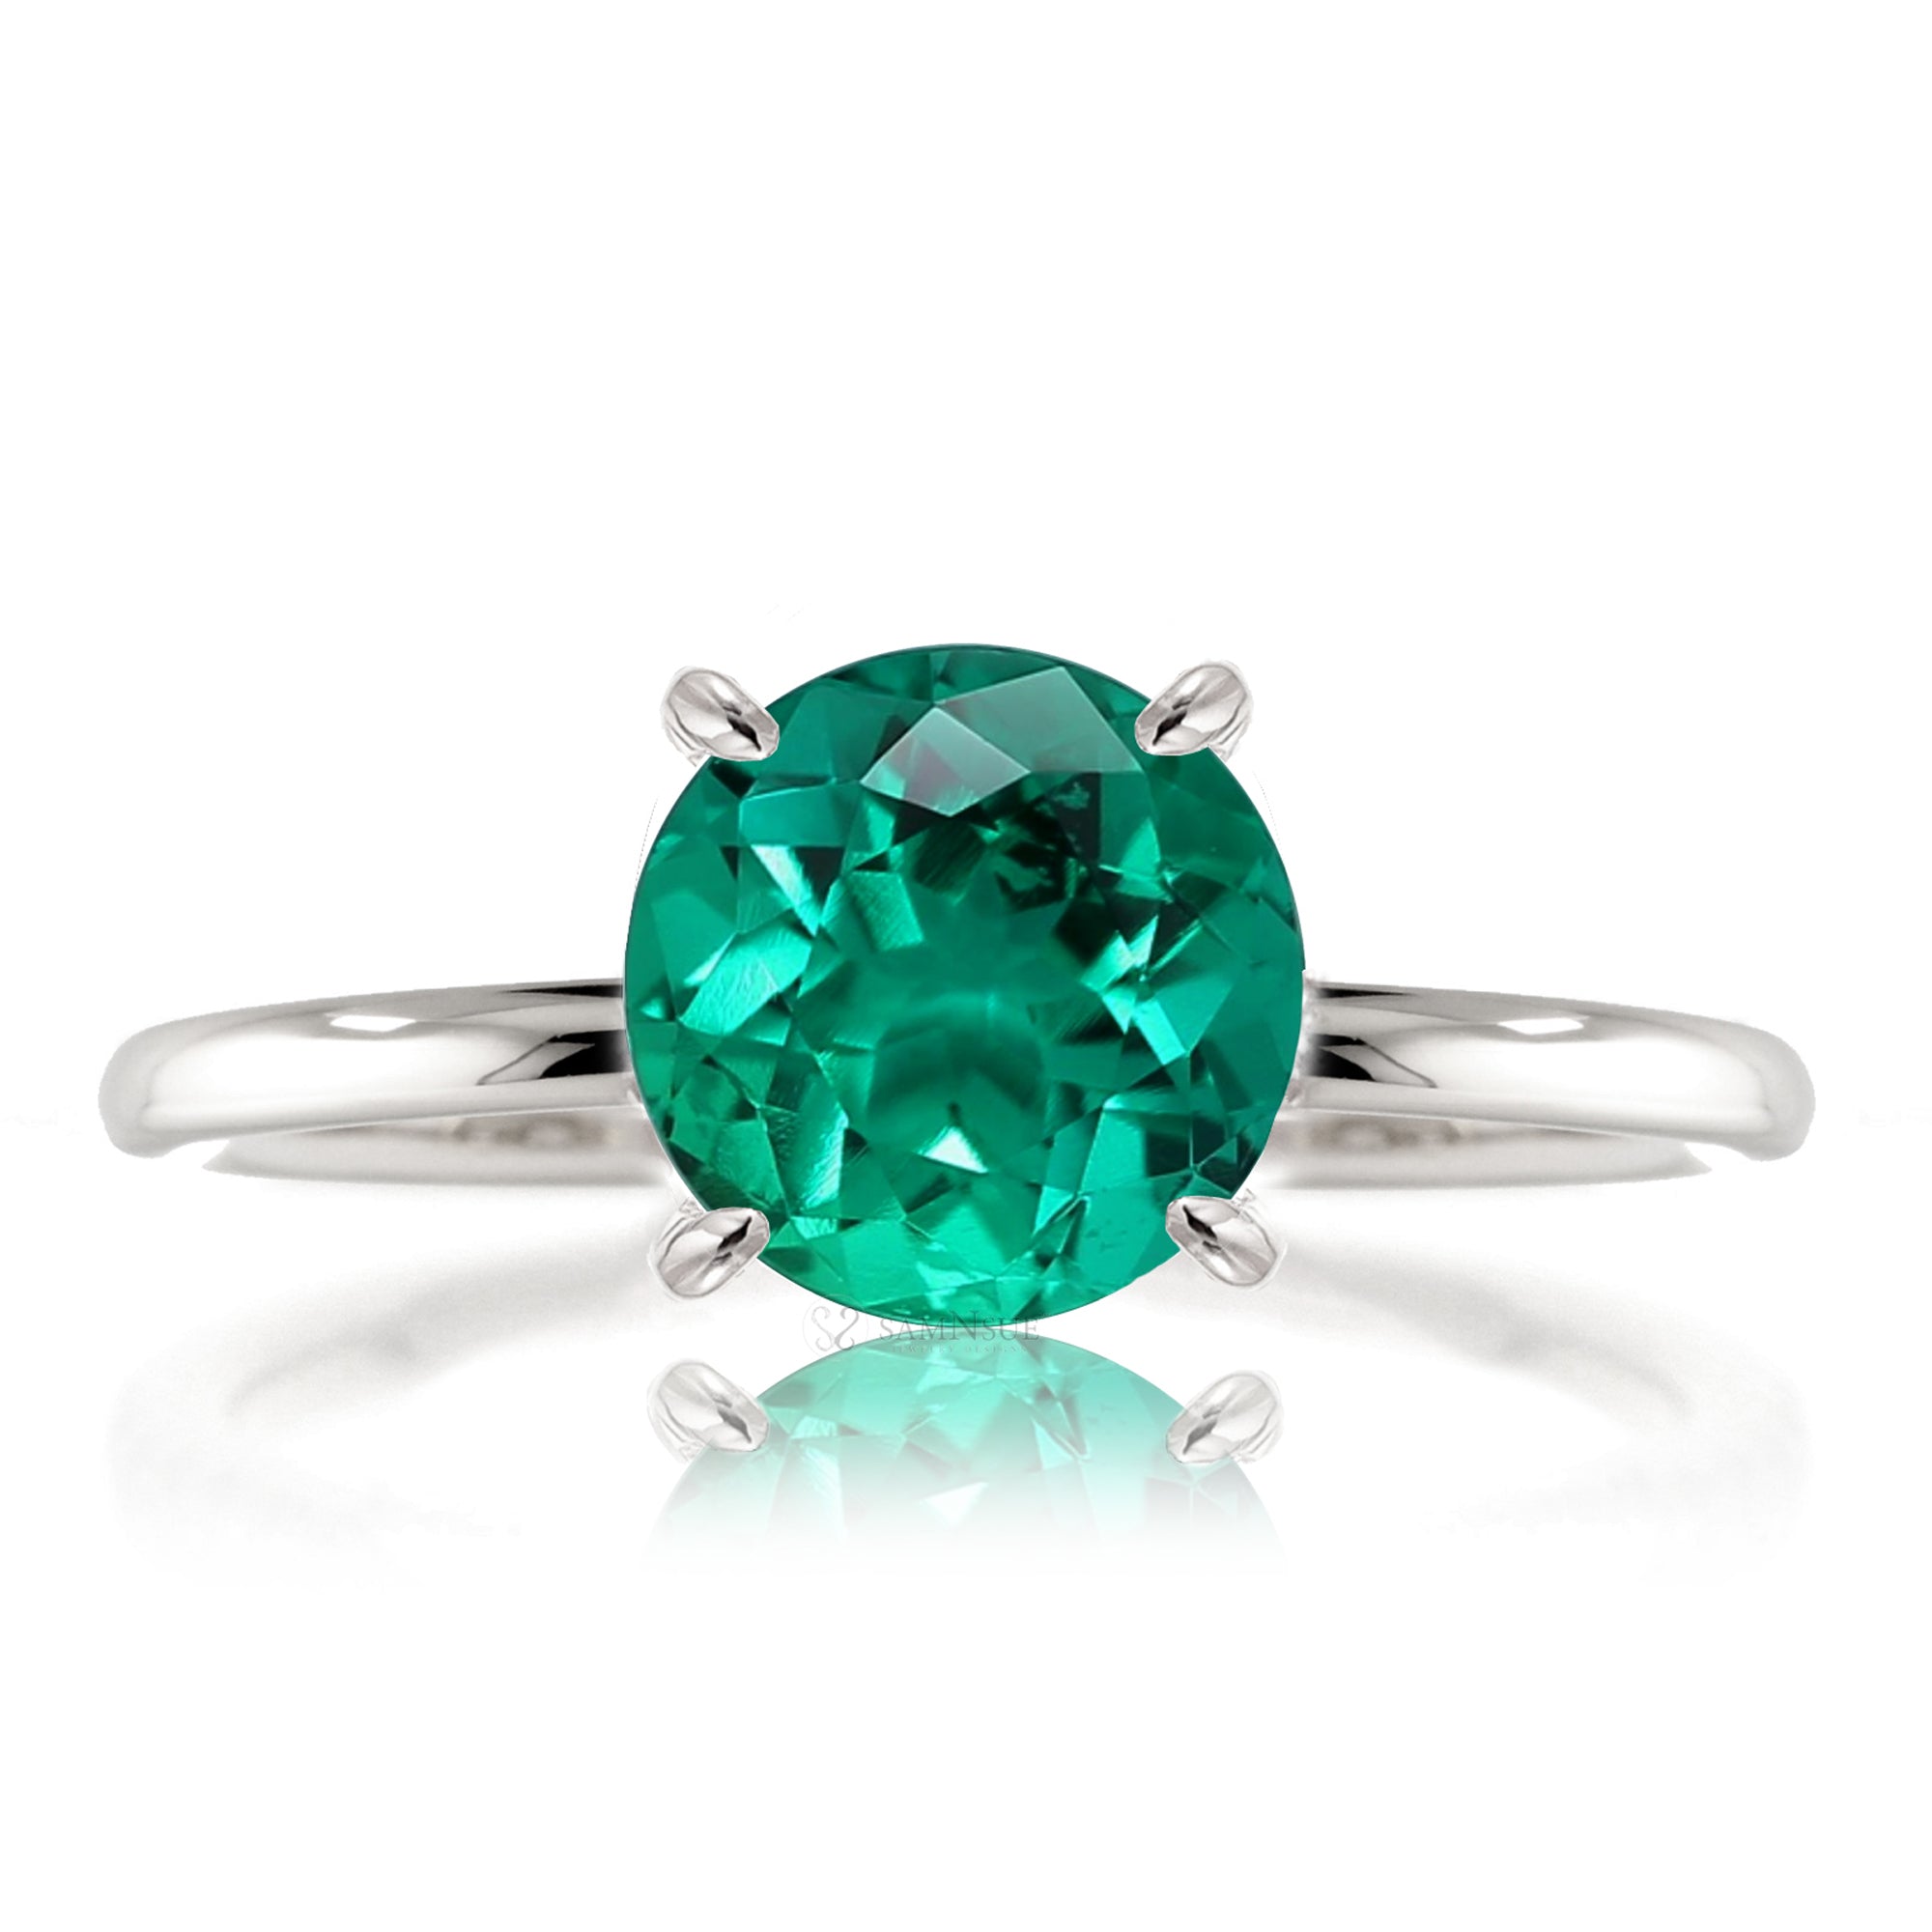 Round green emerald solid band engagement ring yellow gold - the Ava